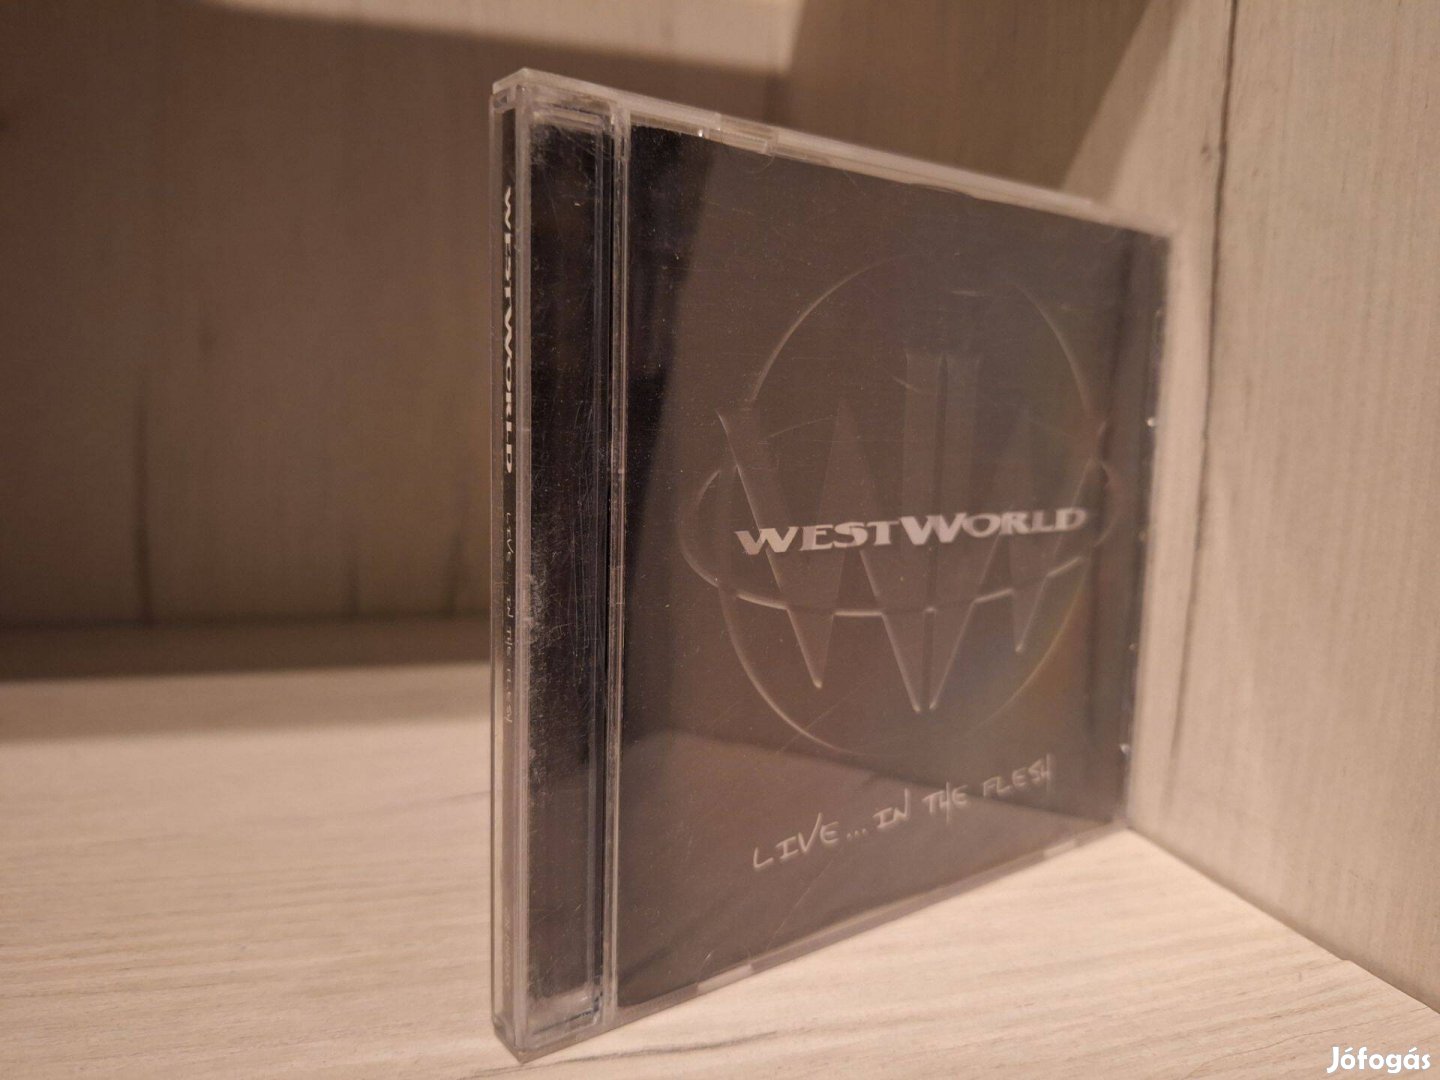 Westworld - Live . In The Flesh CD